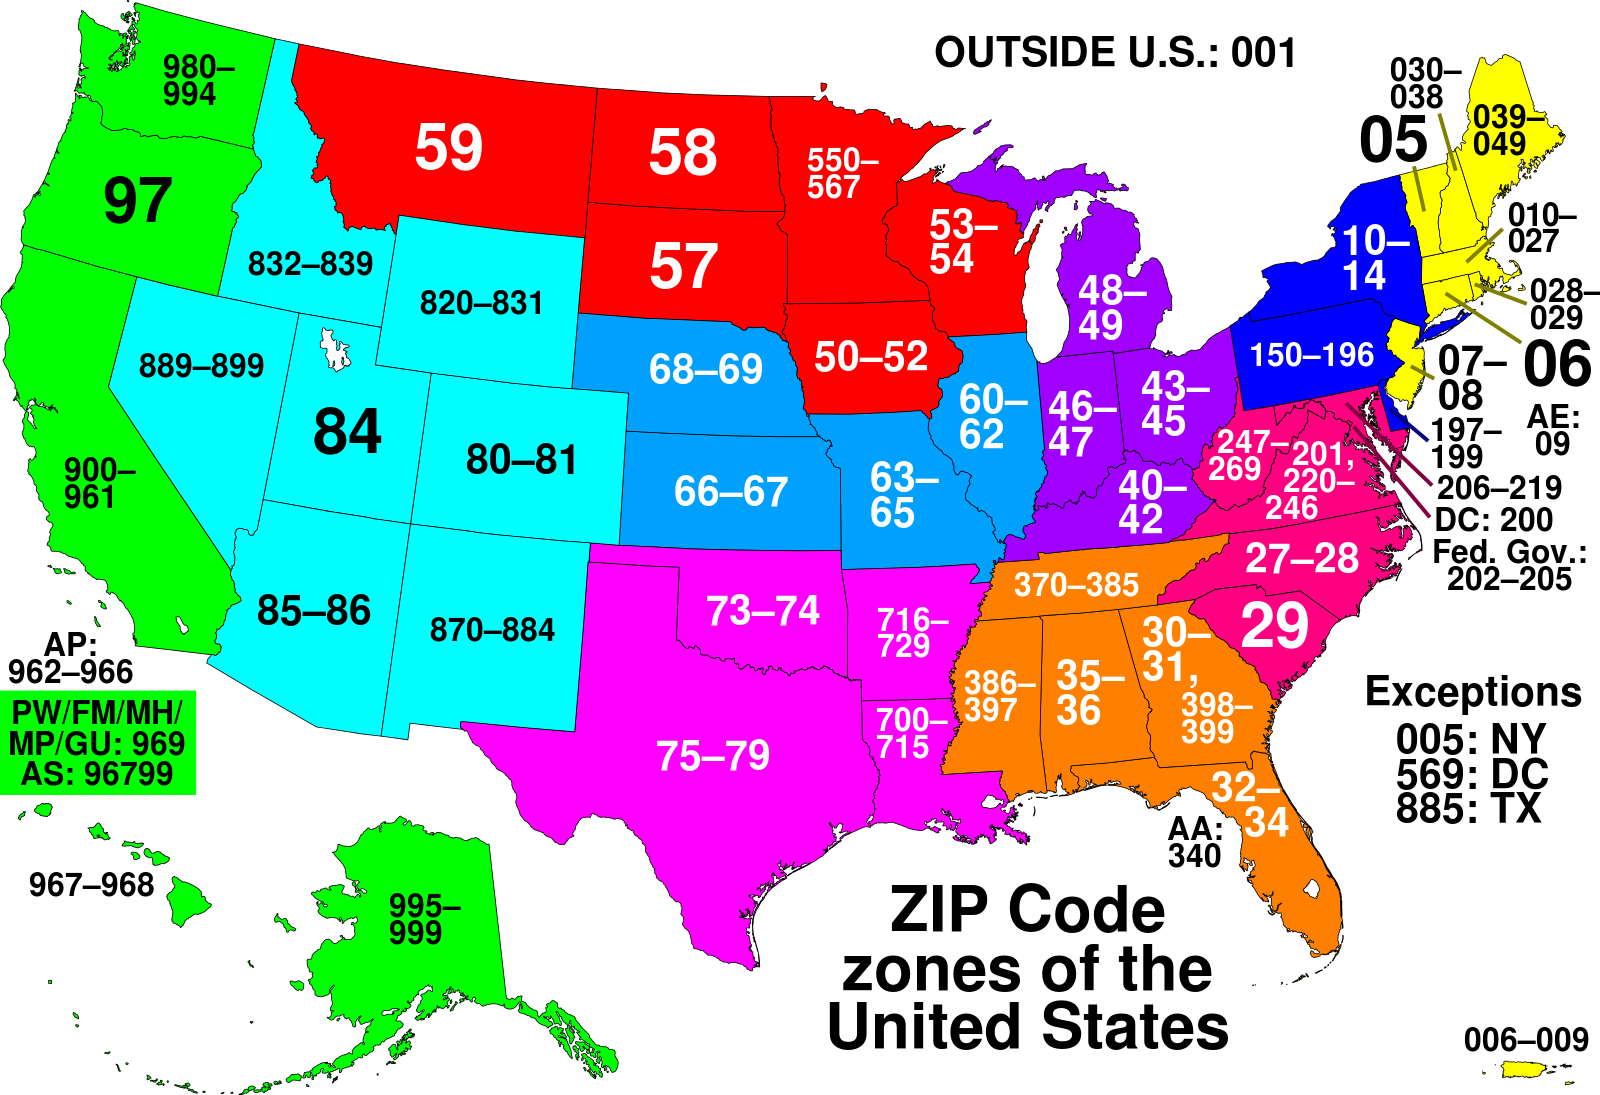 This map of the United States divides the country into ZIP code zones. 